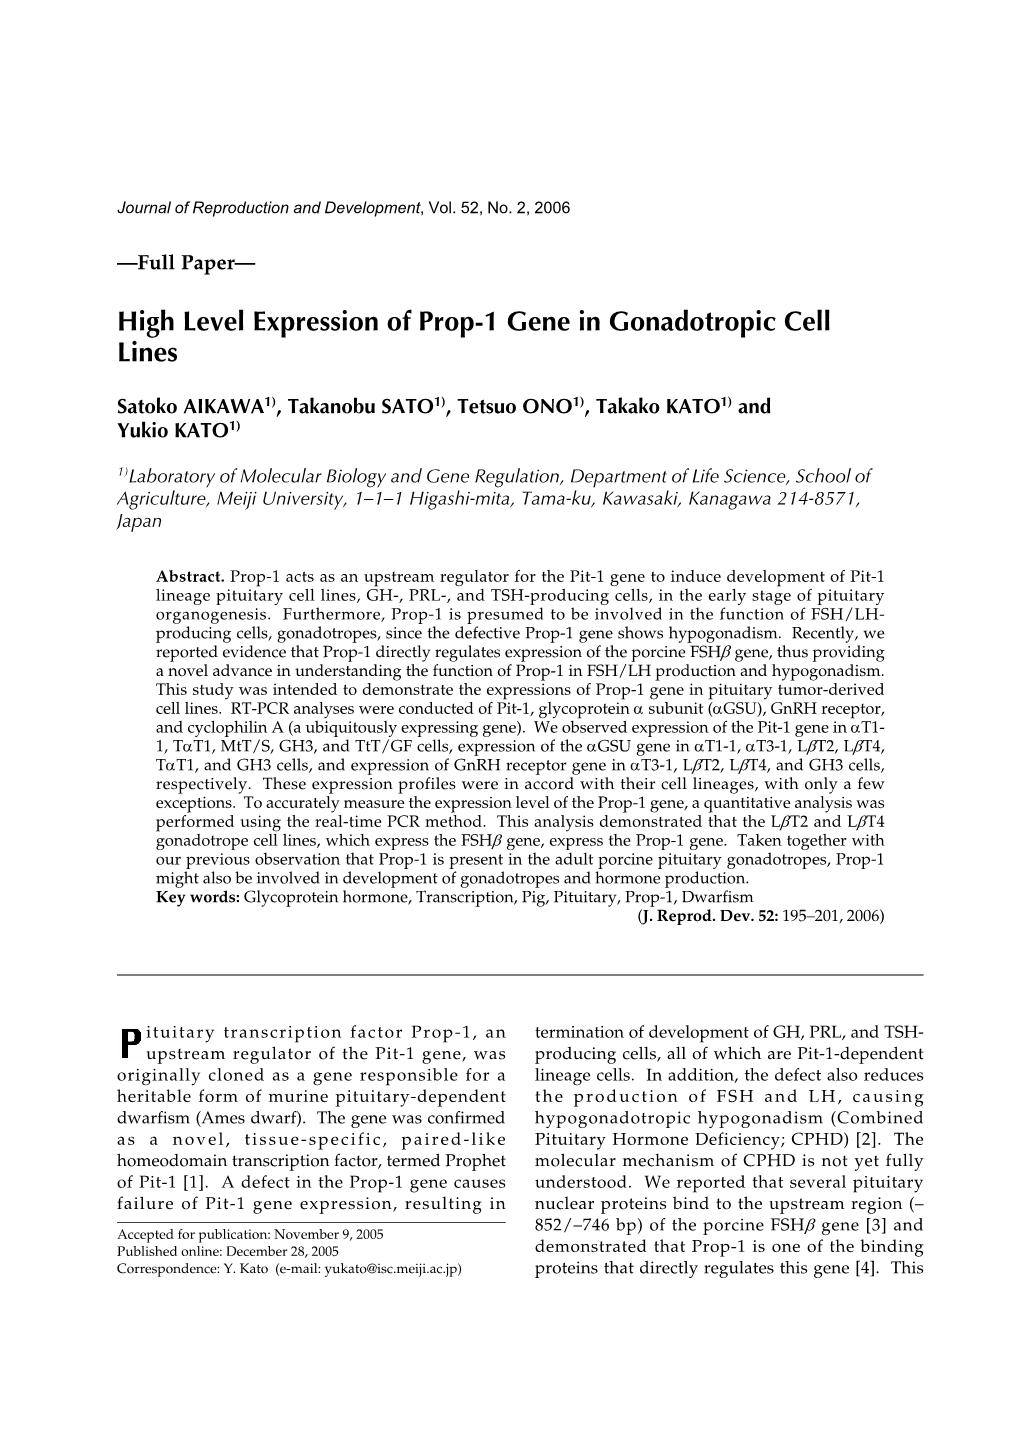 High Level Expression of Prop-1 Gene in Gonadotropic Cell Lines